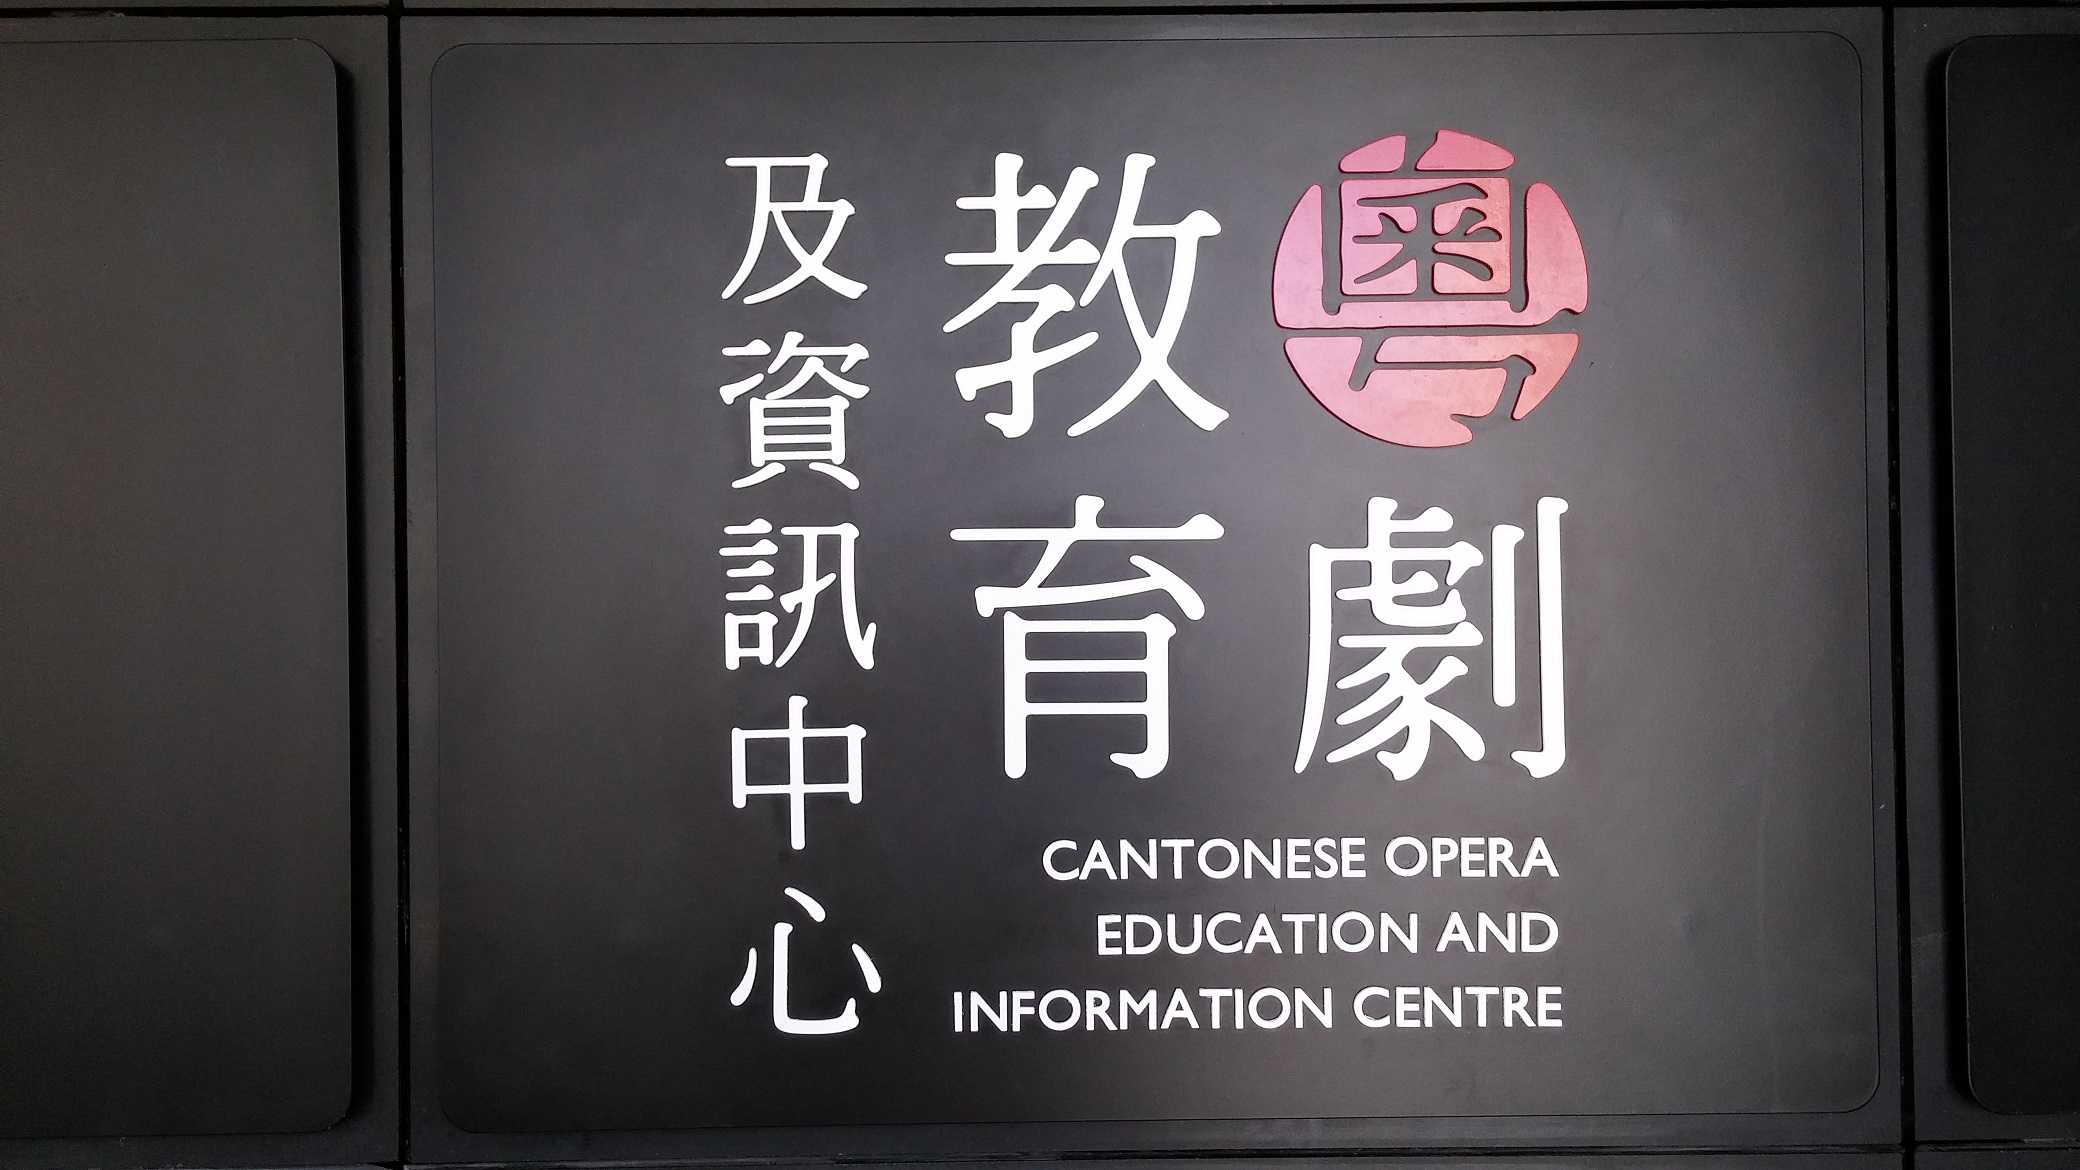 Cantonese Opera Education and Information Center